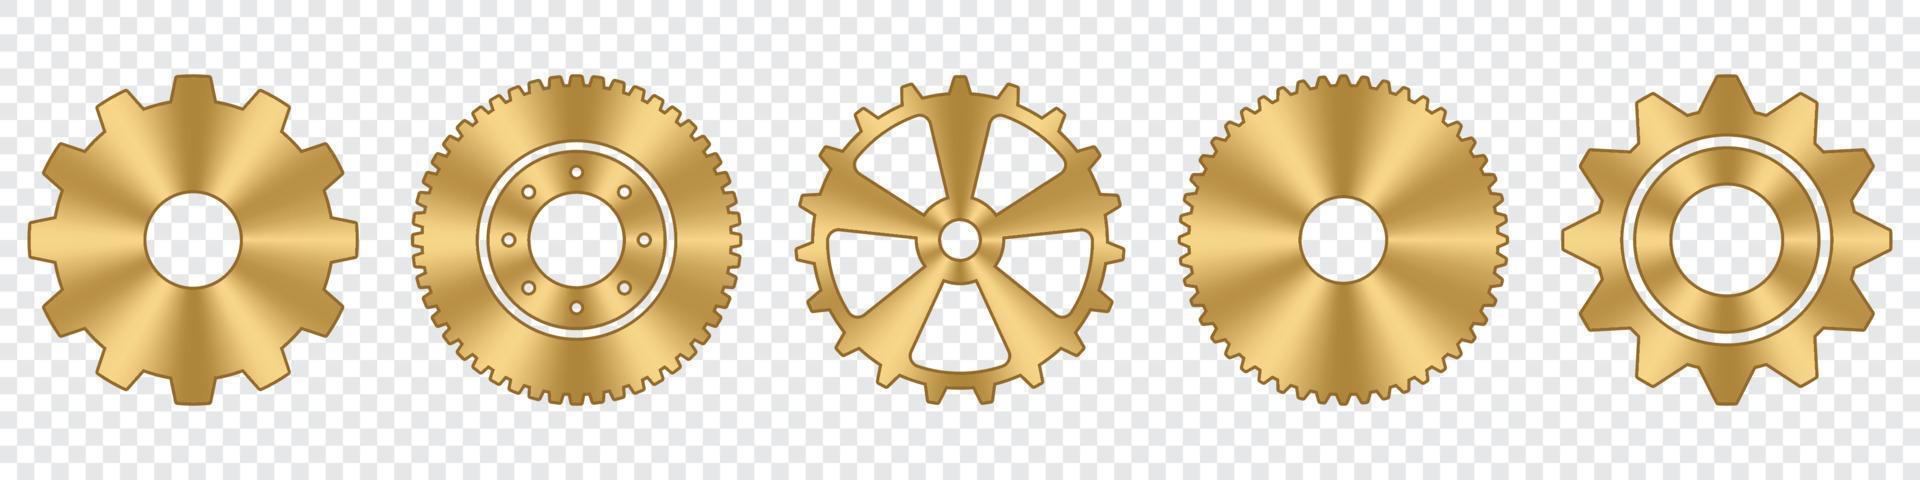 Gear wheels set. Gold metal cog wheels collection. Industrial icons. Gear setting vector icon set. Vector illustration